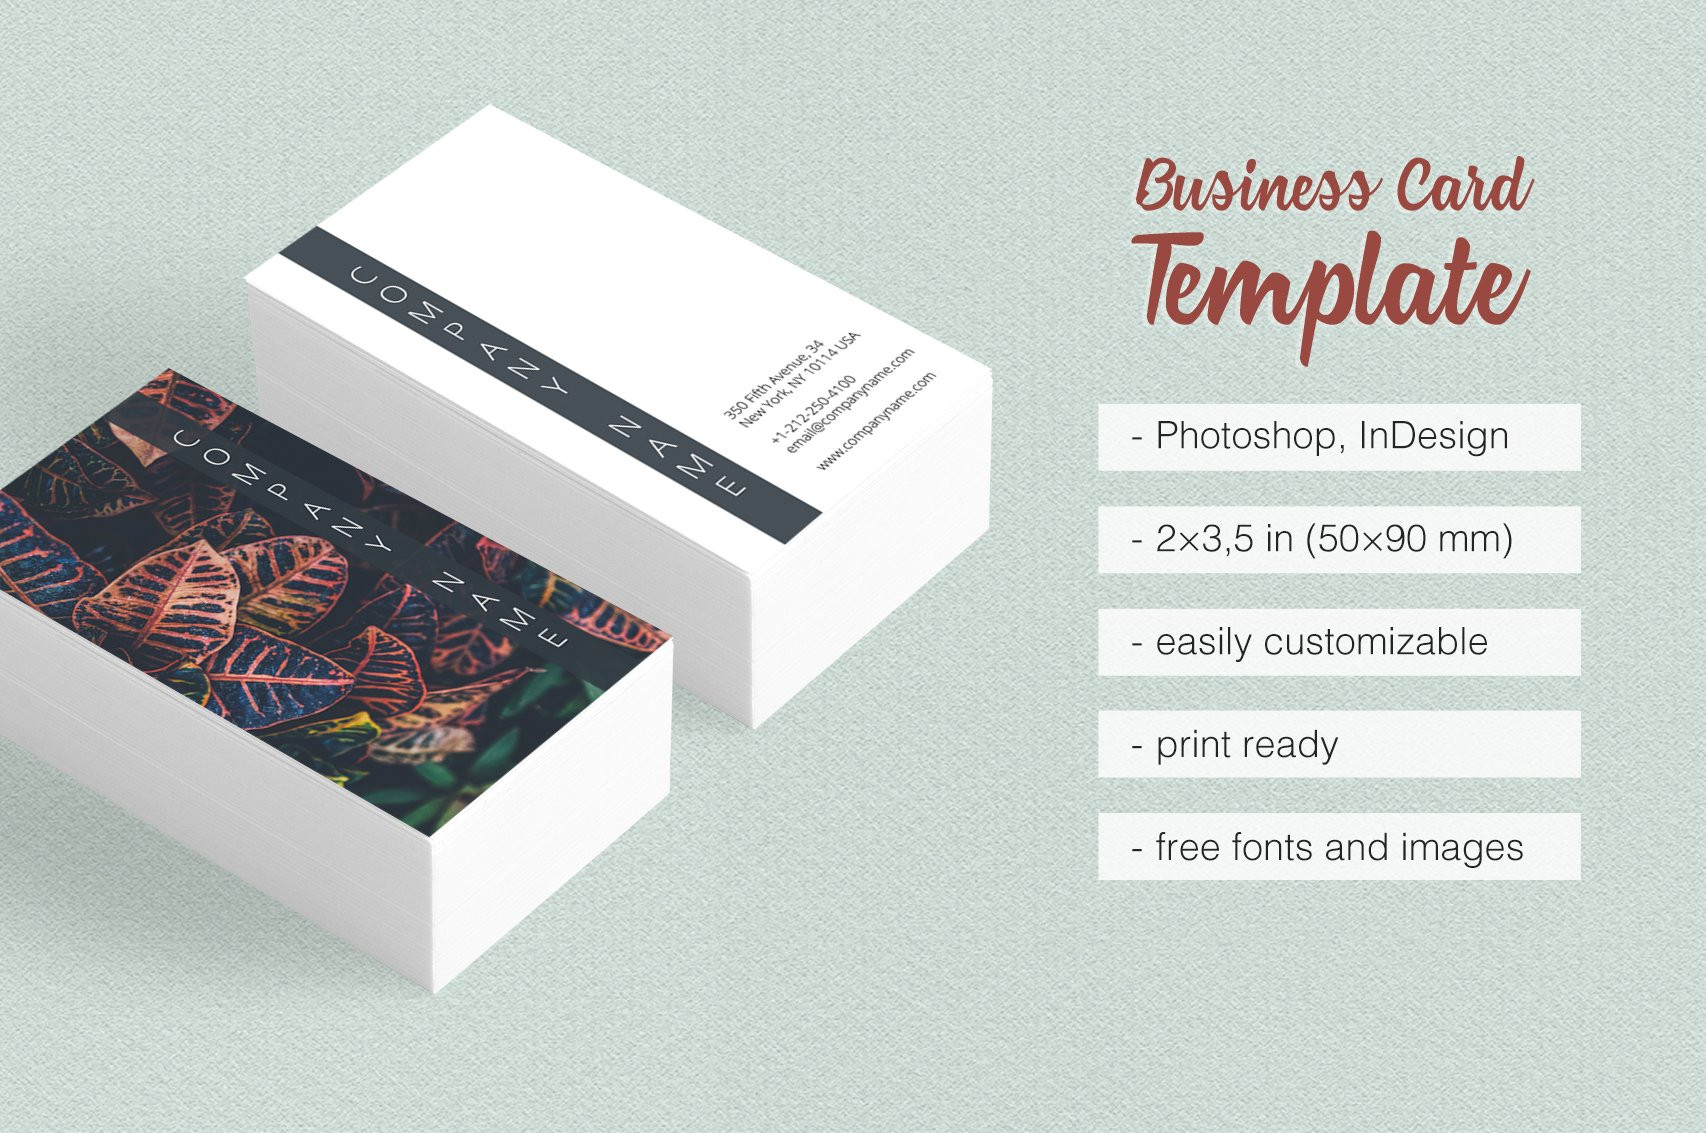 Business Cards Indesign Image Collections Business Card Of Business Card Templates Indesign